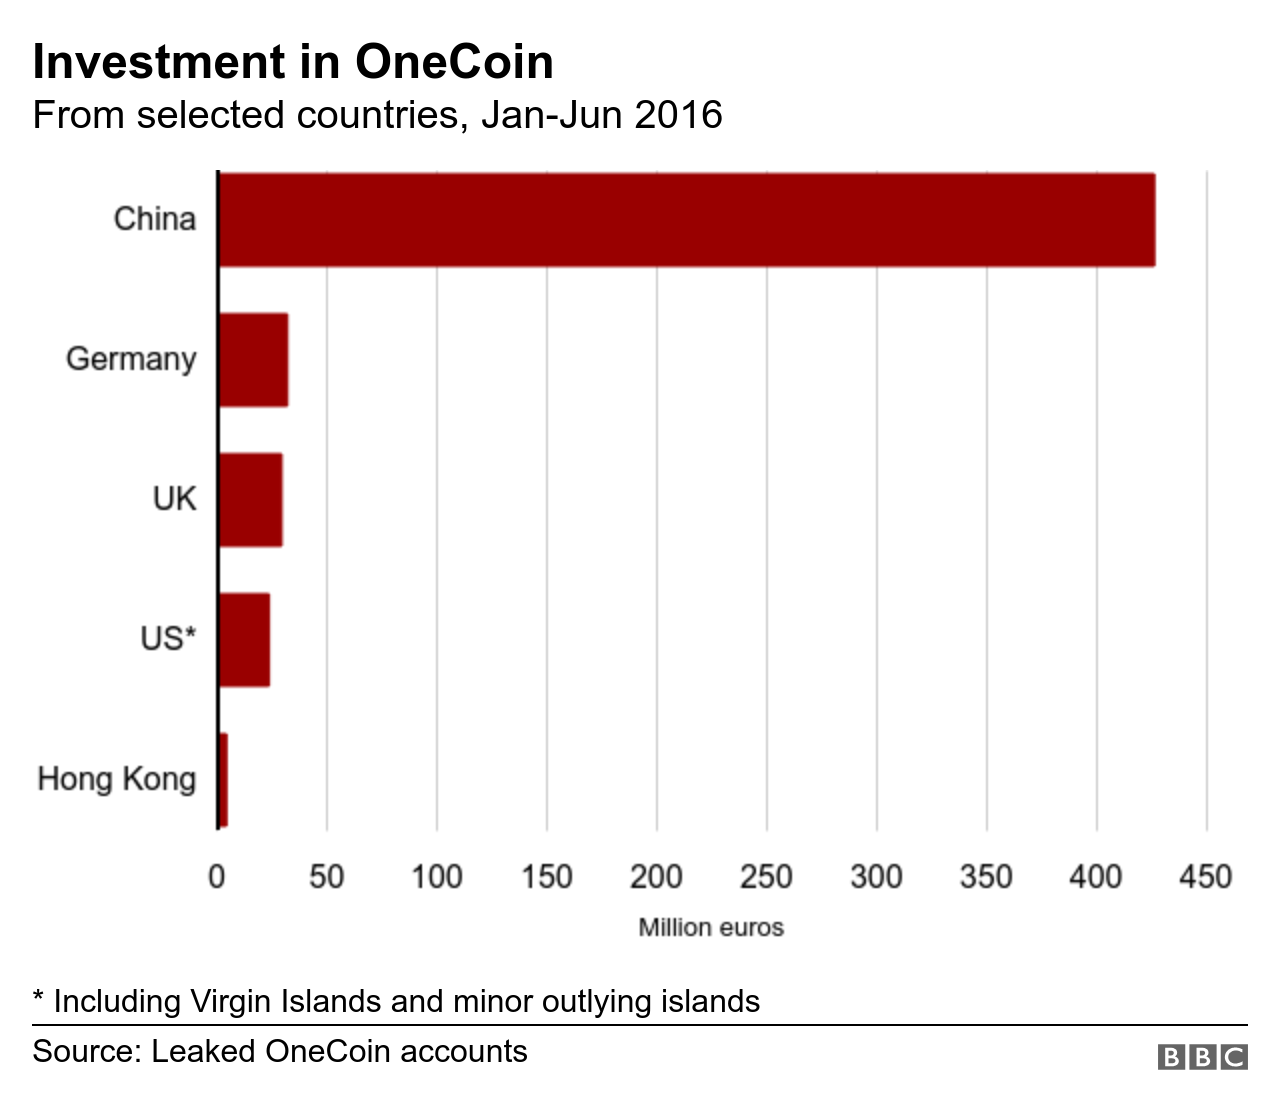 Graphic showing investment in OneCoin over time